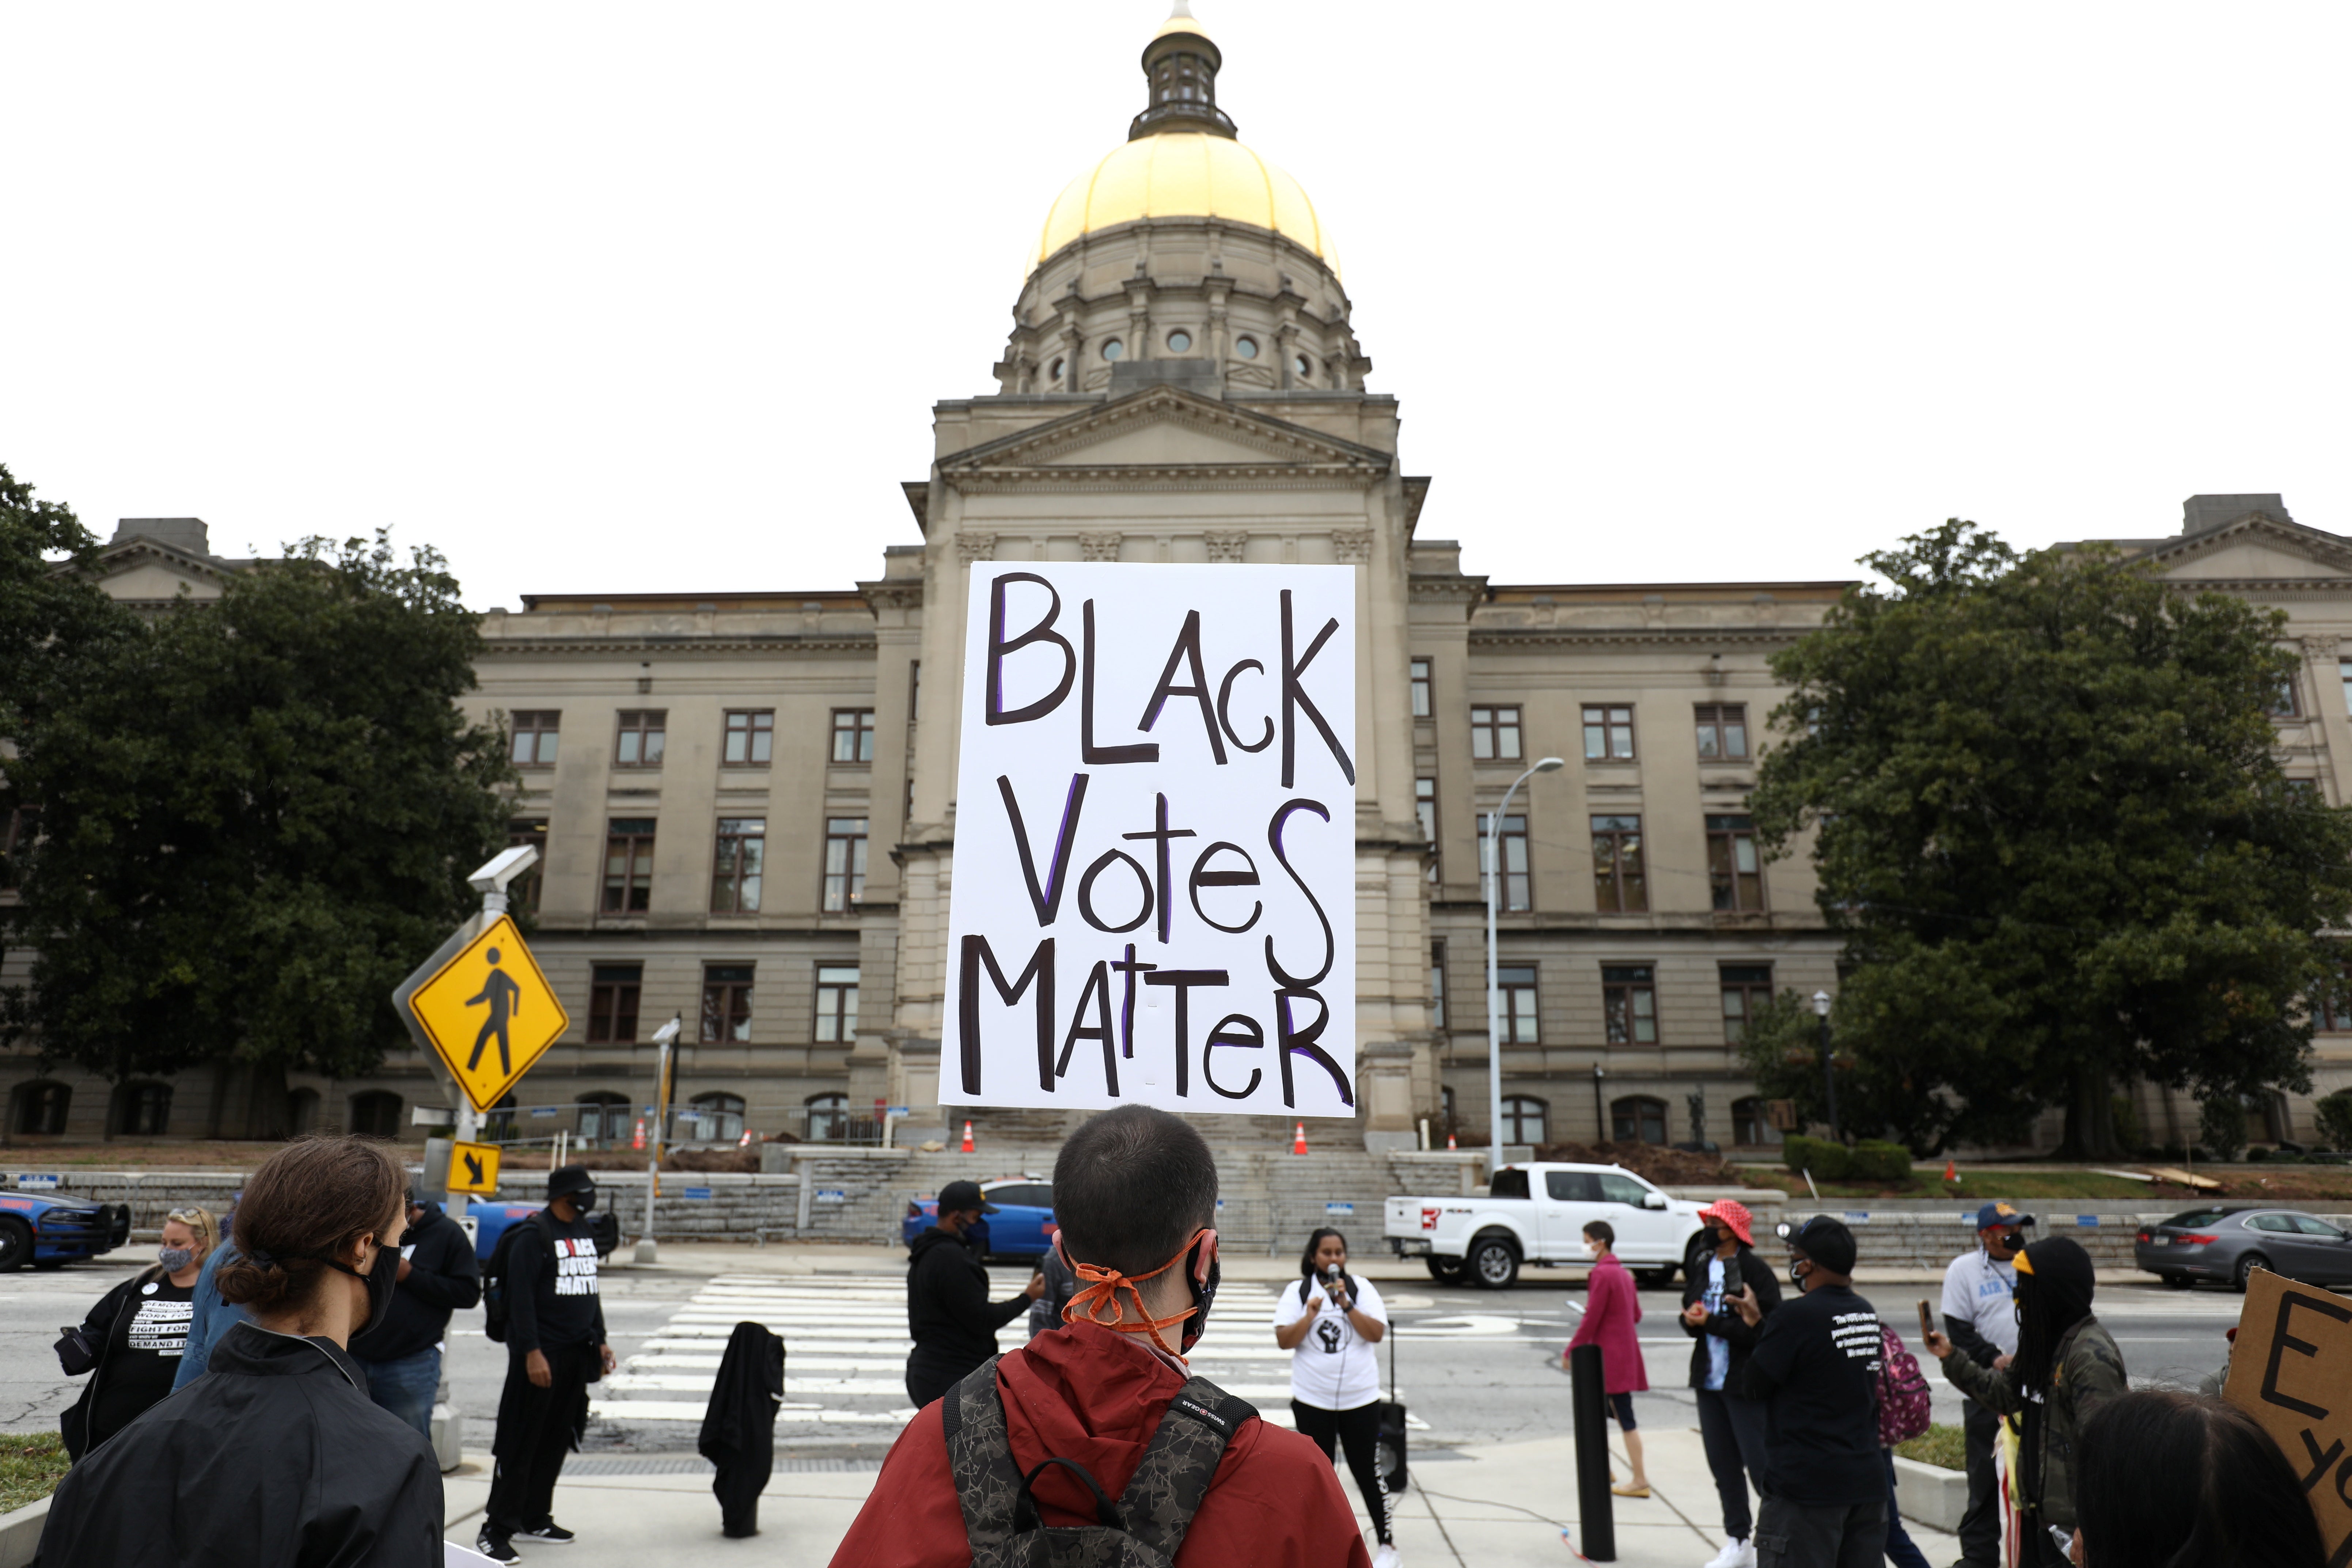 Demonstrators protest a sweeping elections bill to place greater restriction on voting in Georgia, one of more than 40 states where Republicans are proposing new restrictions on voting rights following 2020 elections.